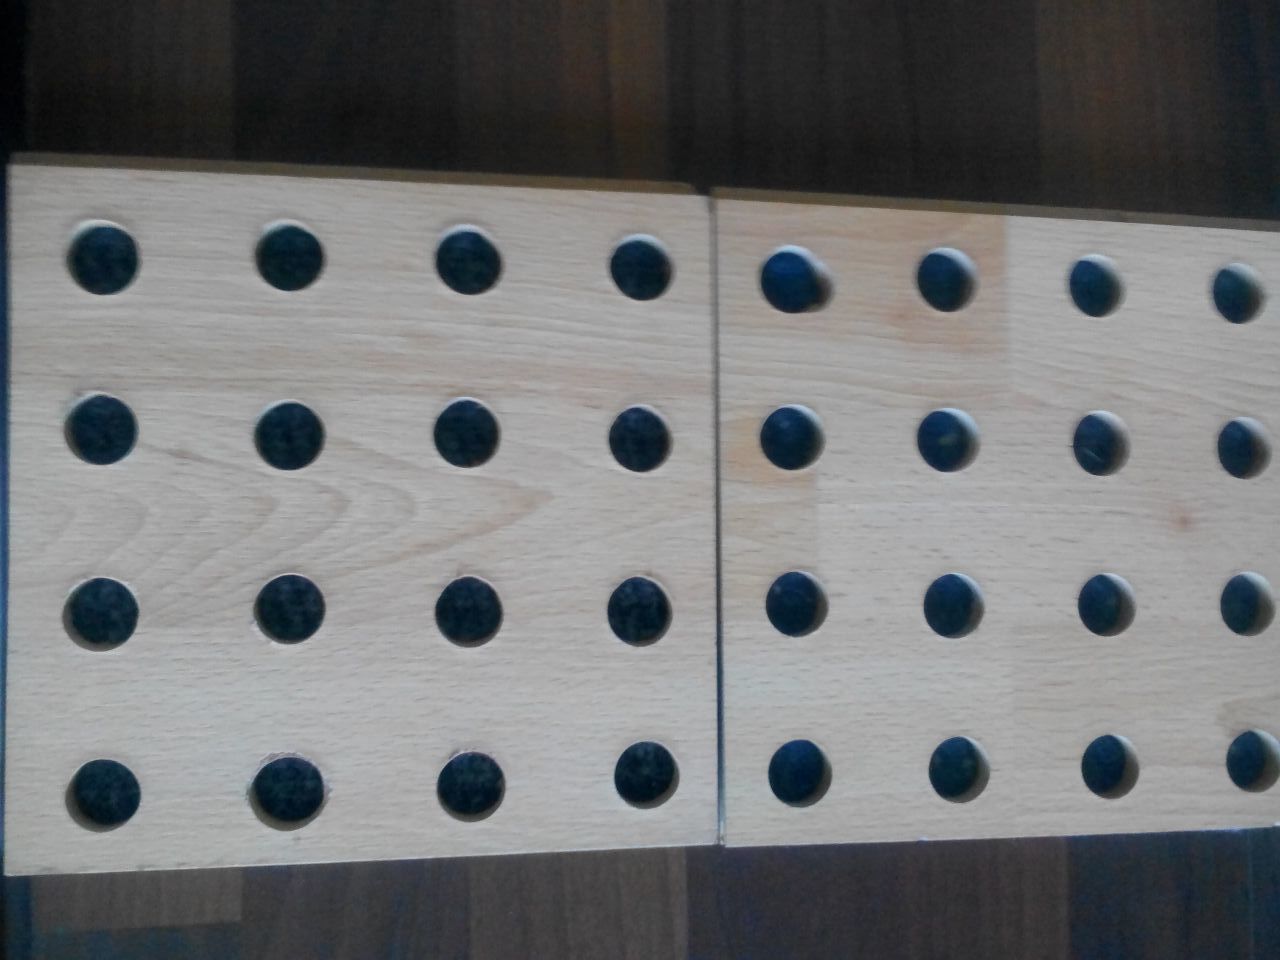 Laminated Mdf Perforated Acoustic Wall Panel